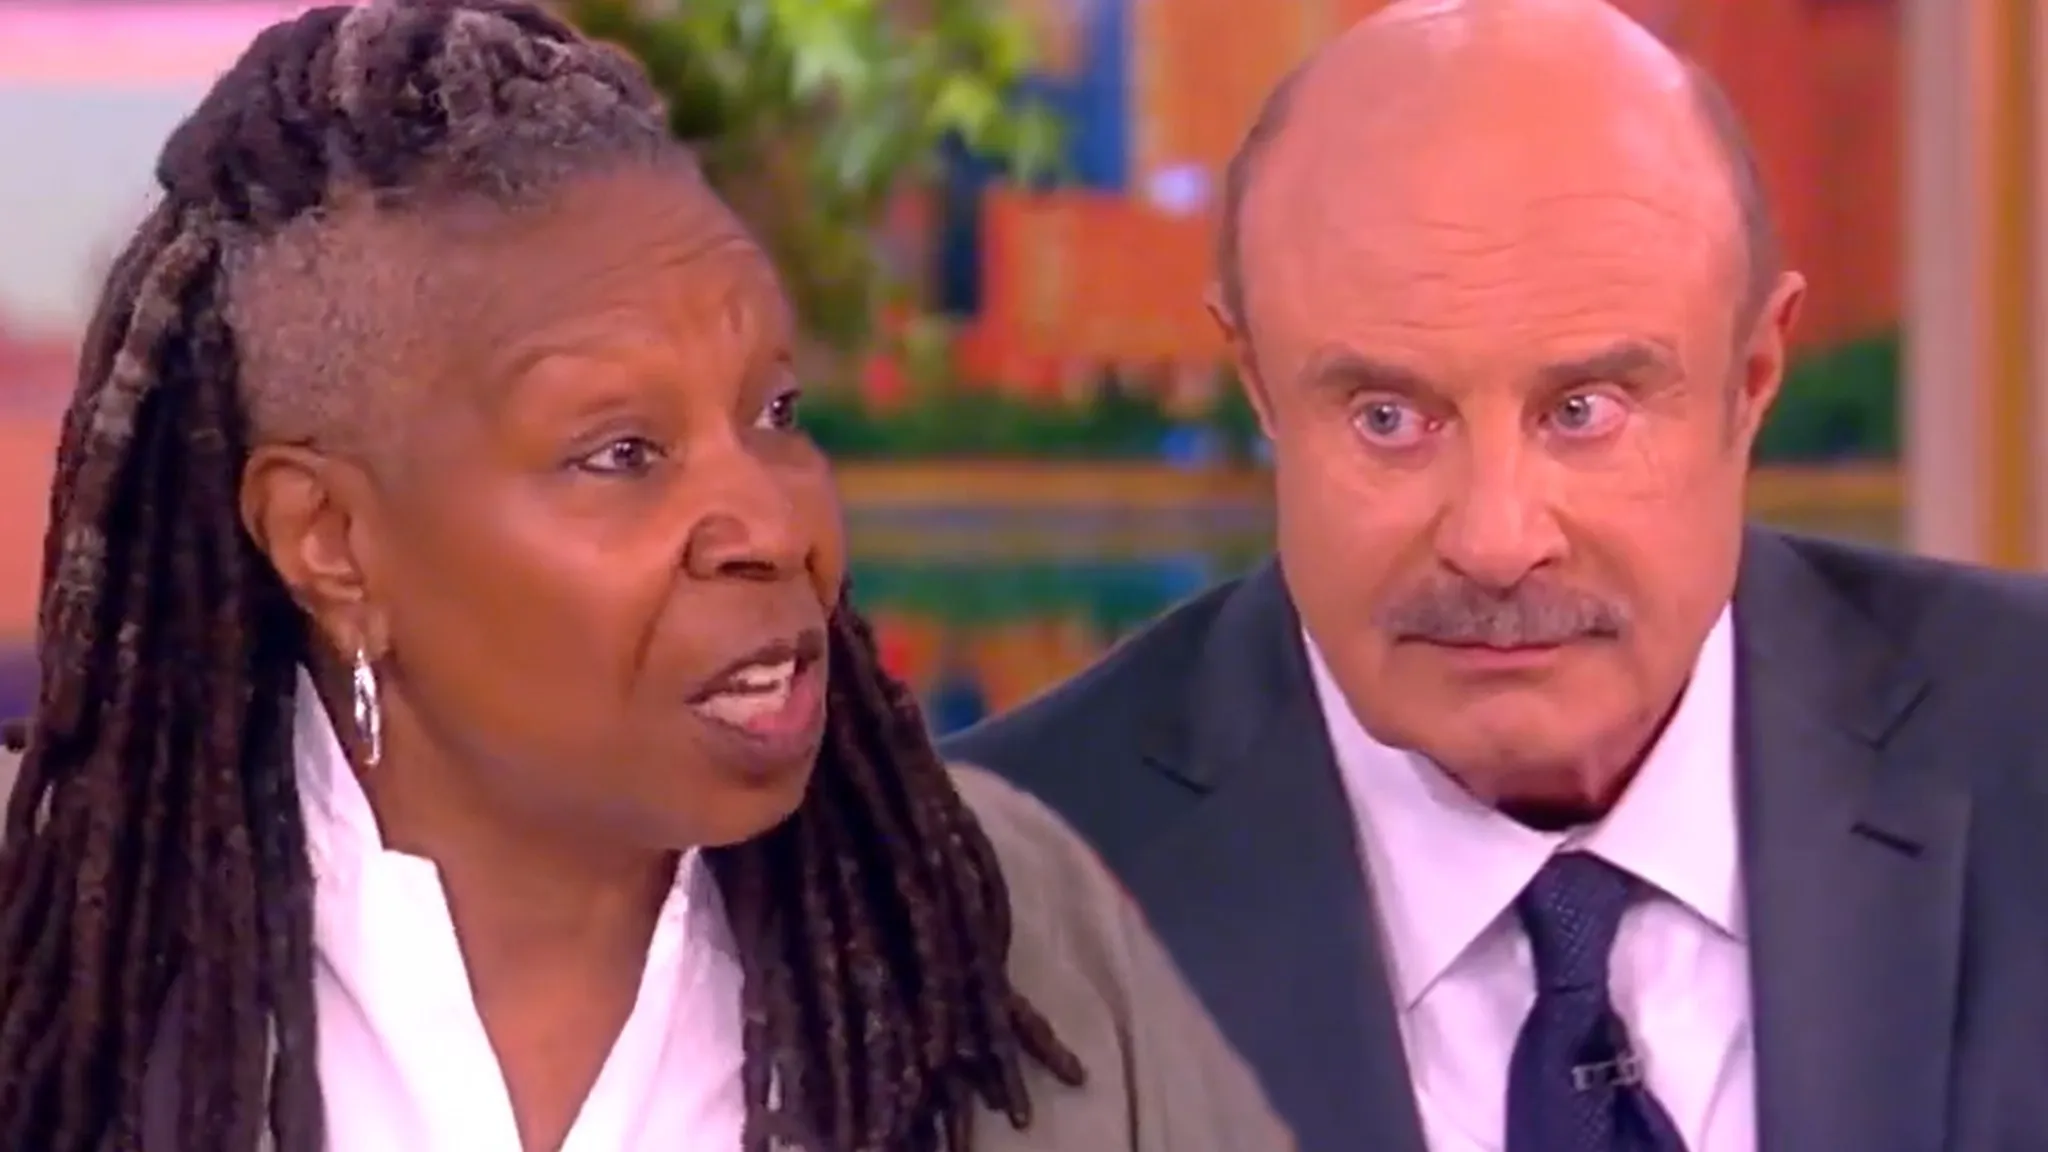 Dr Phil Tells The View Hosts: Kids Suffered More From Covid Lockdowns Than The Virus